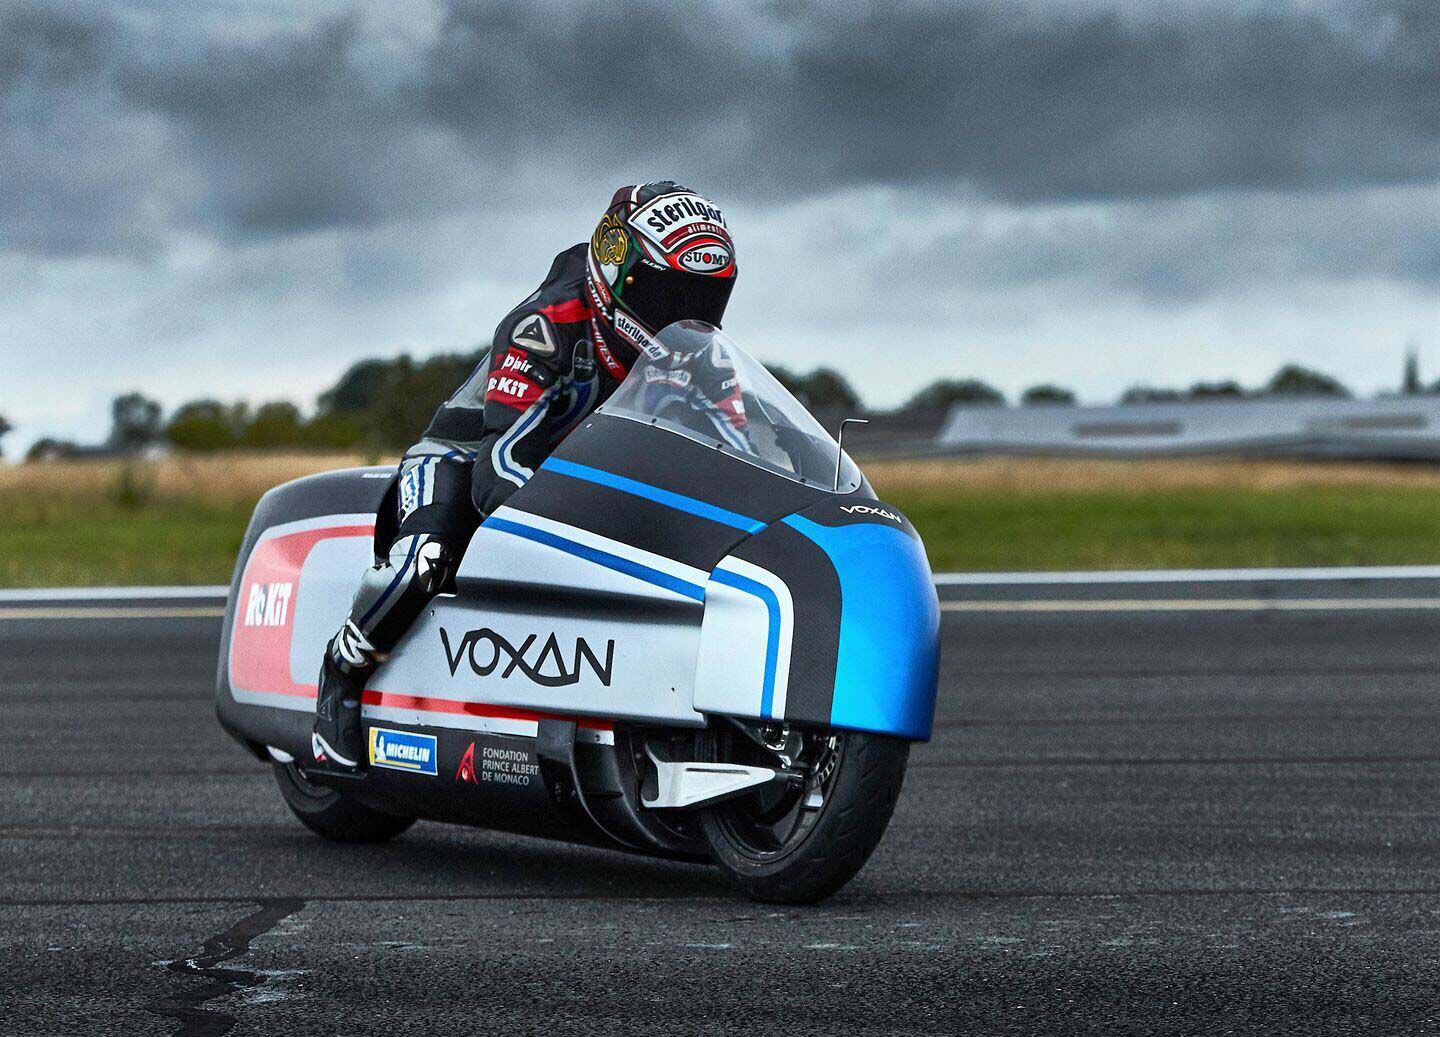 Biaggi plans to break more records on the Voxan.